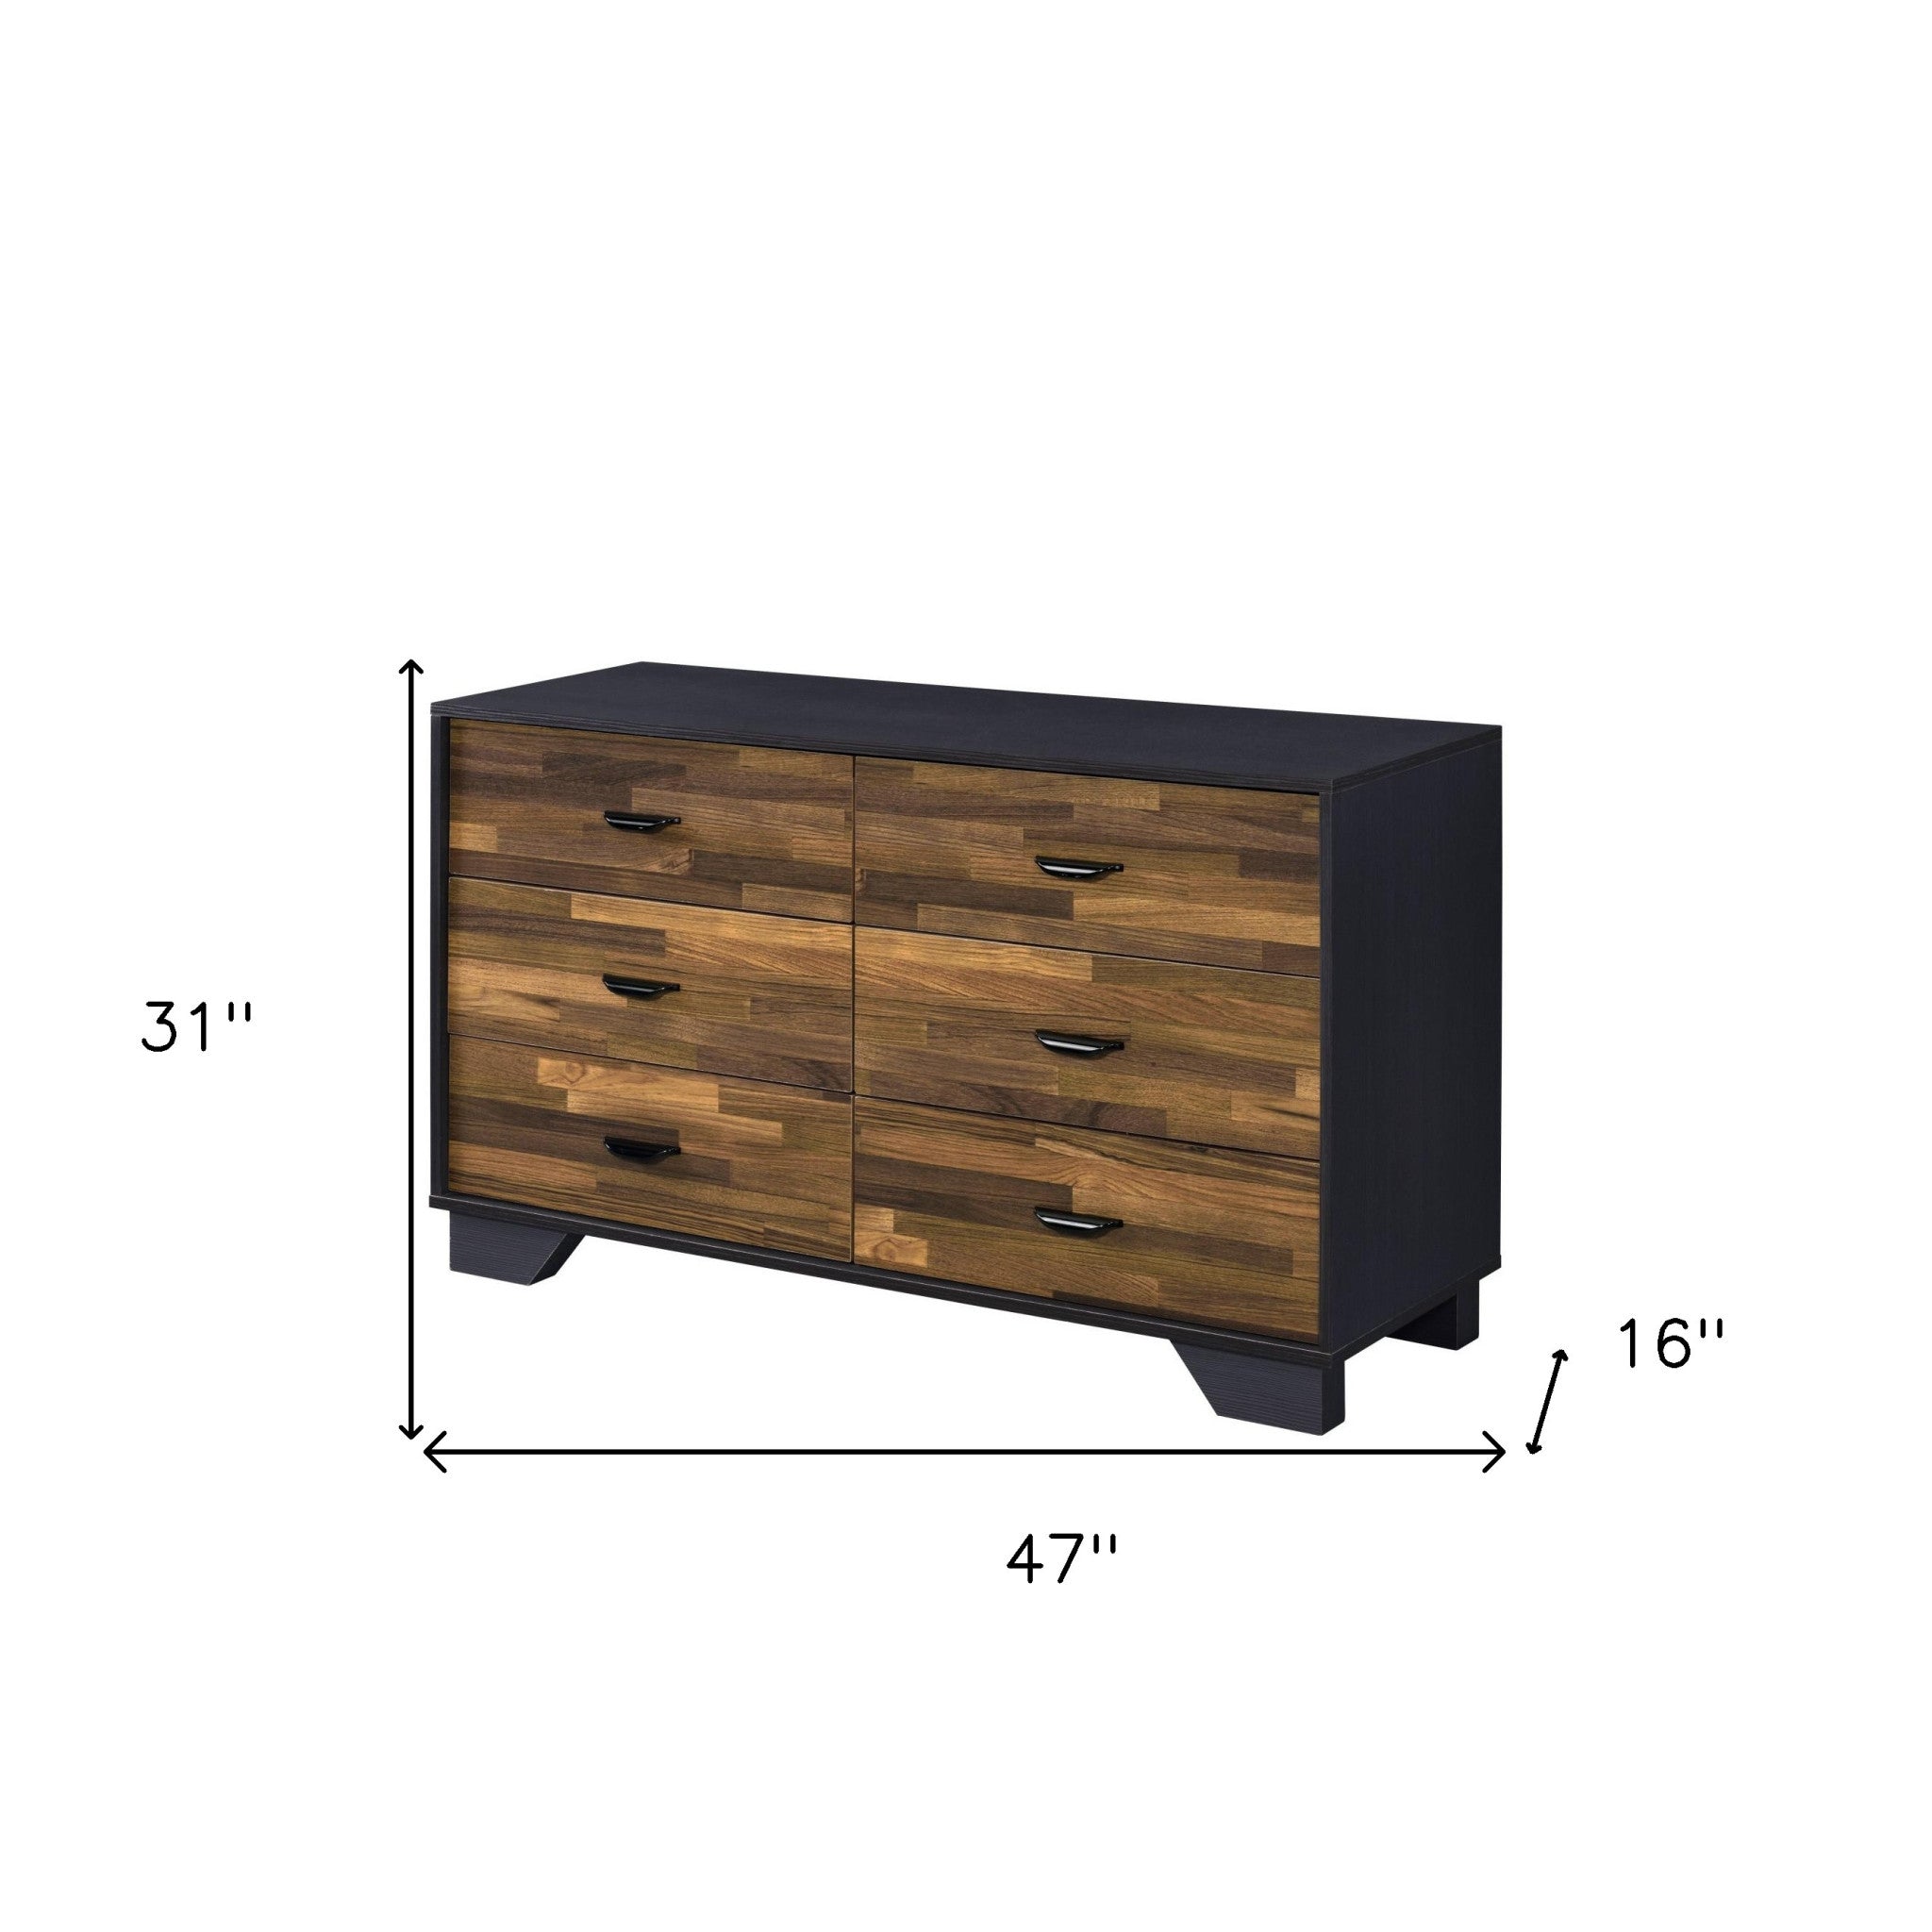 47" Walnut Black And Finish Manufactured Wood Six Drawer Double Dresser